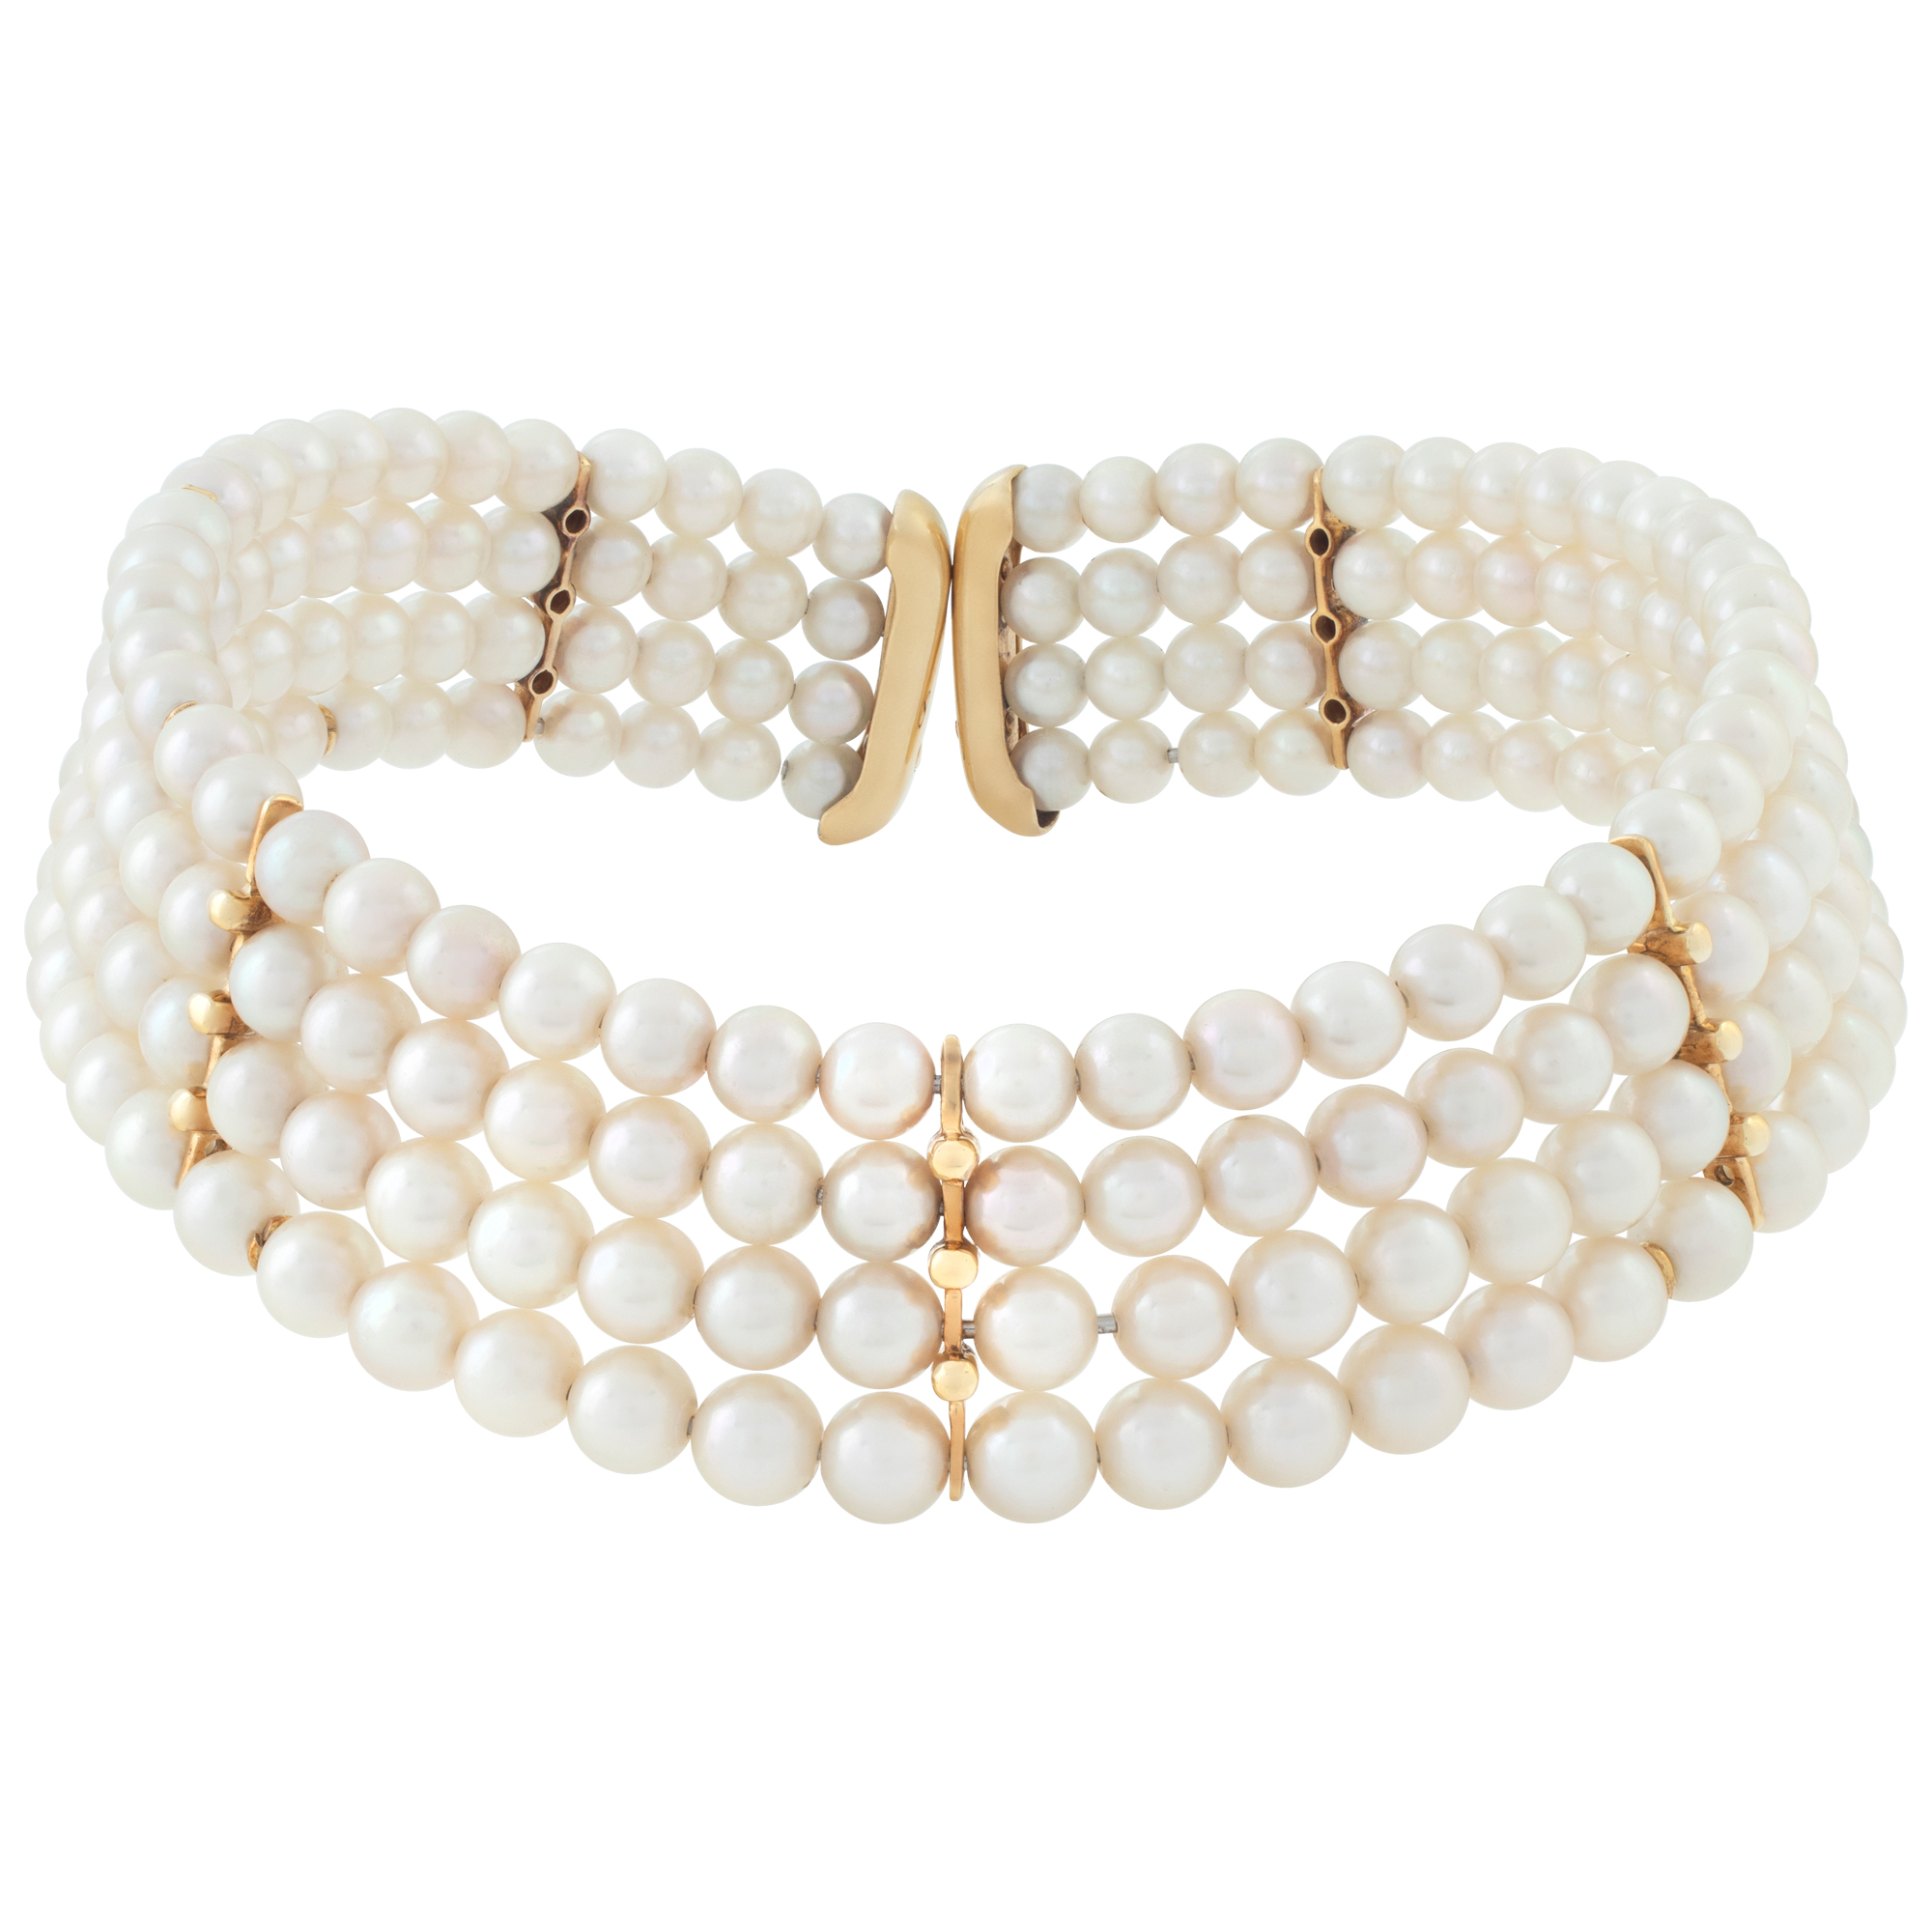 Pearl choker in 18k yellow gold. 6.5 mm pearls